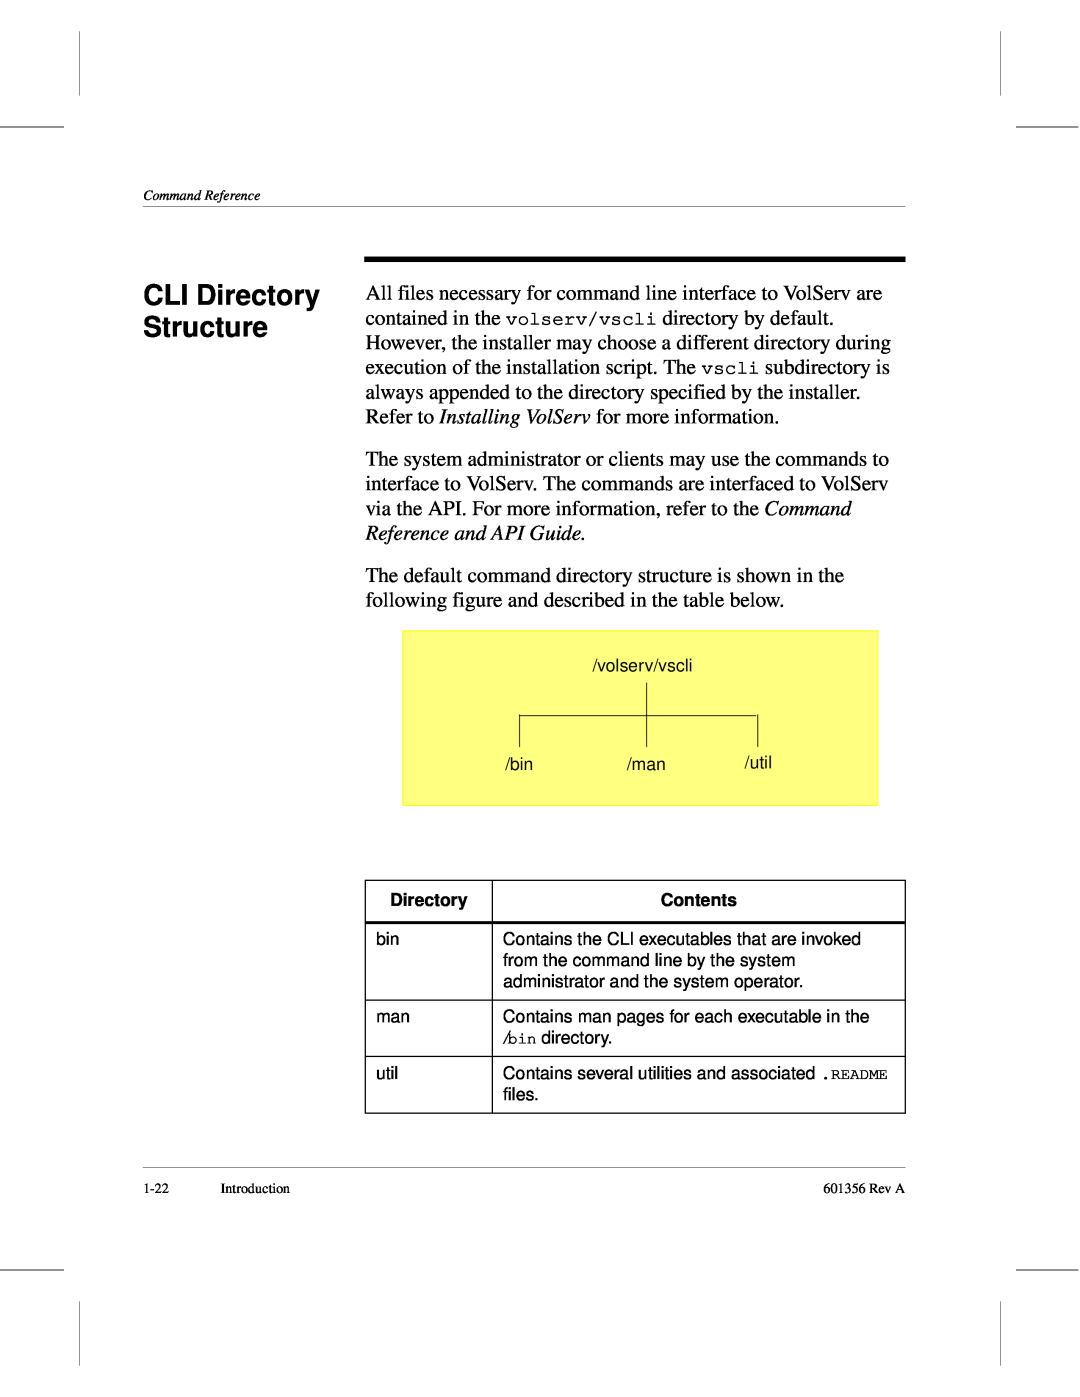 ADIC 601356 manual CLI Directory Structure, Contents 